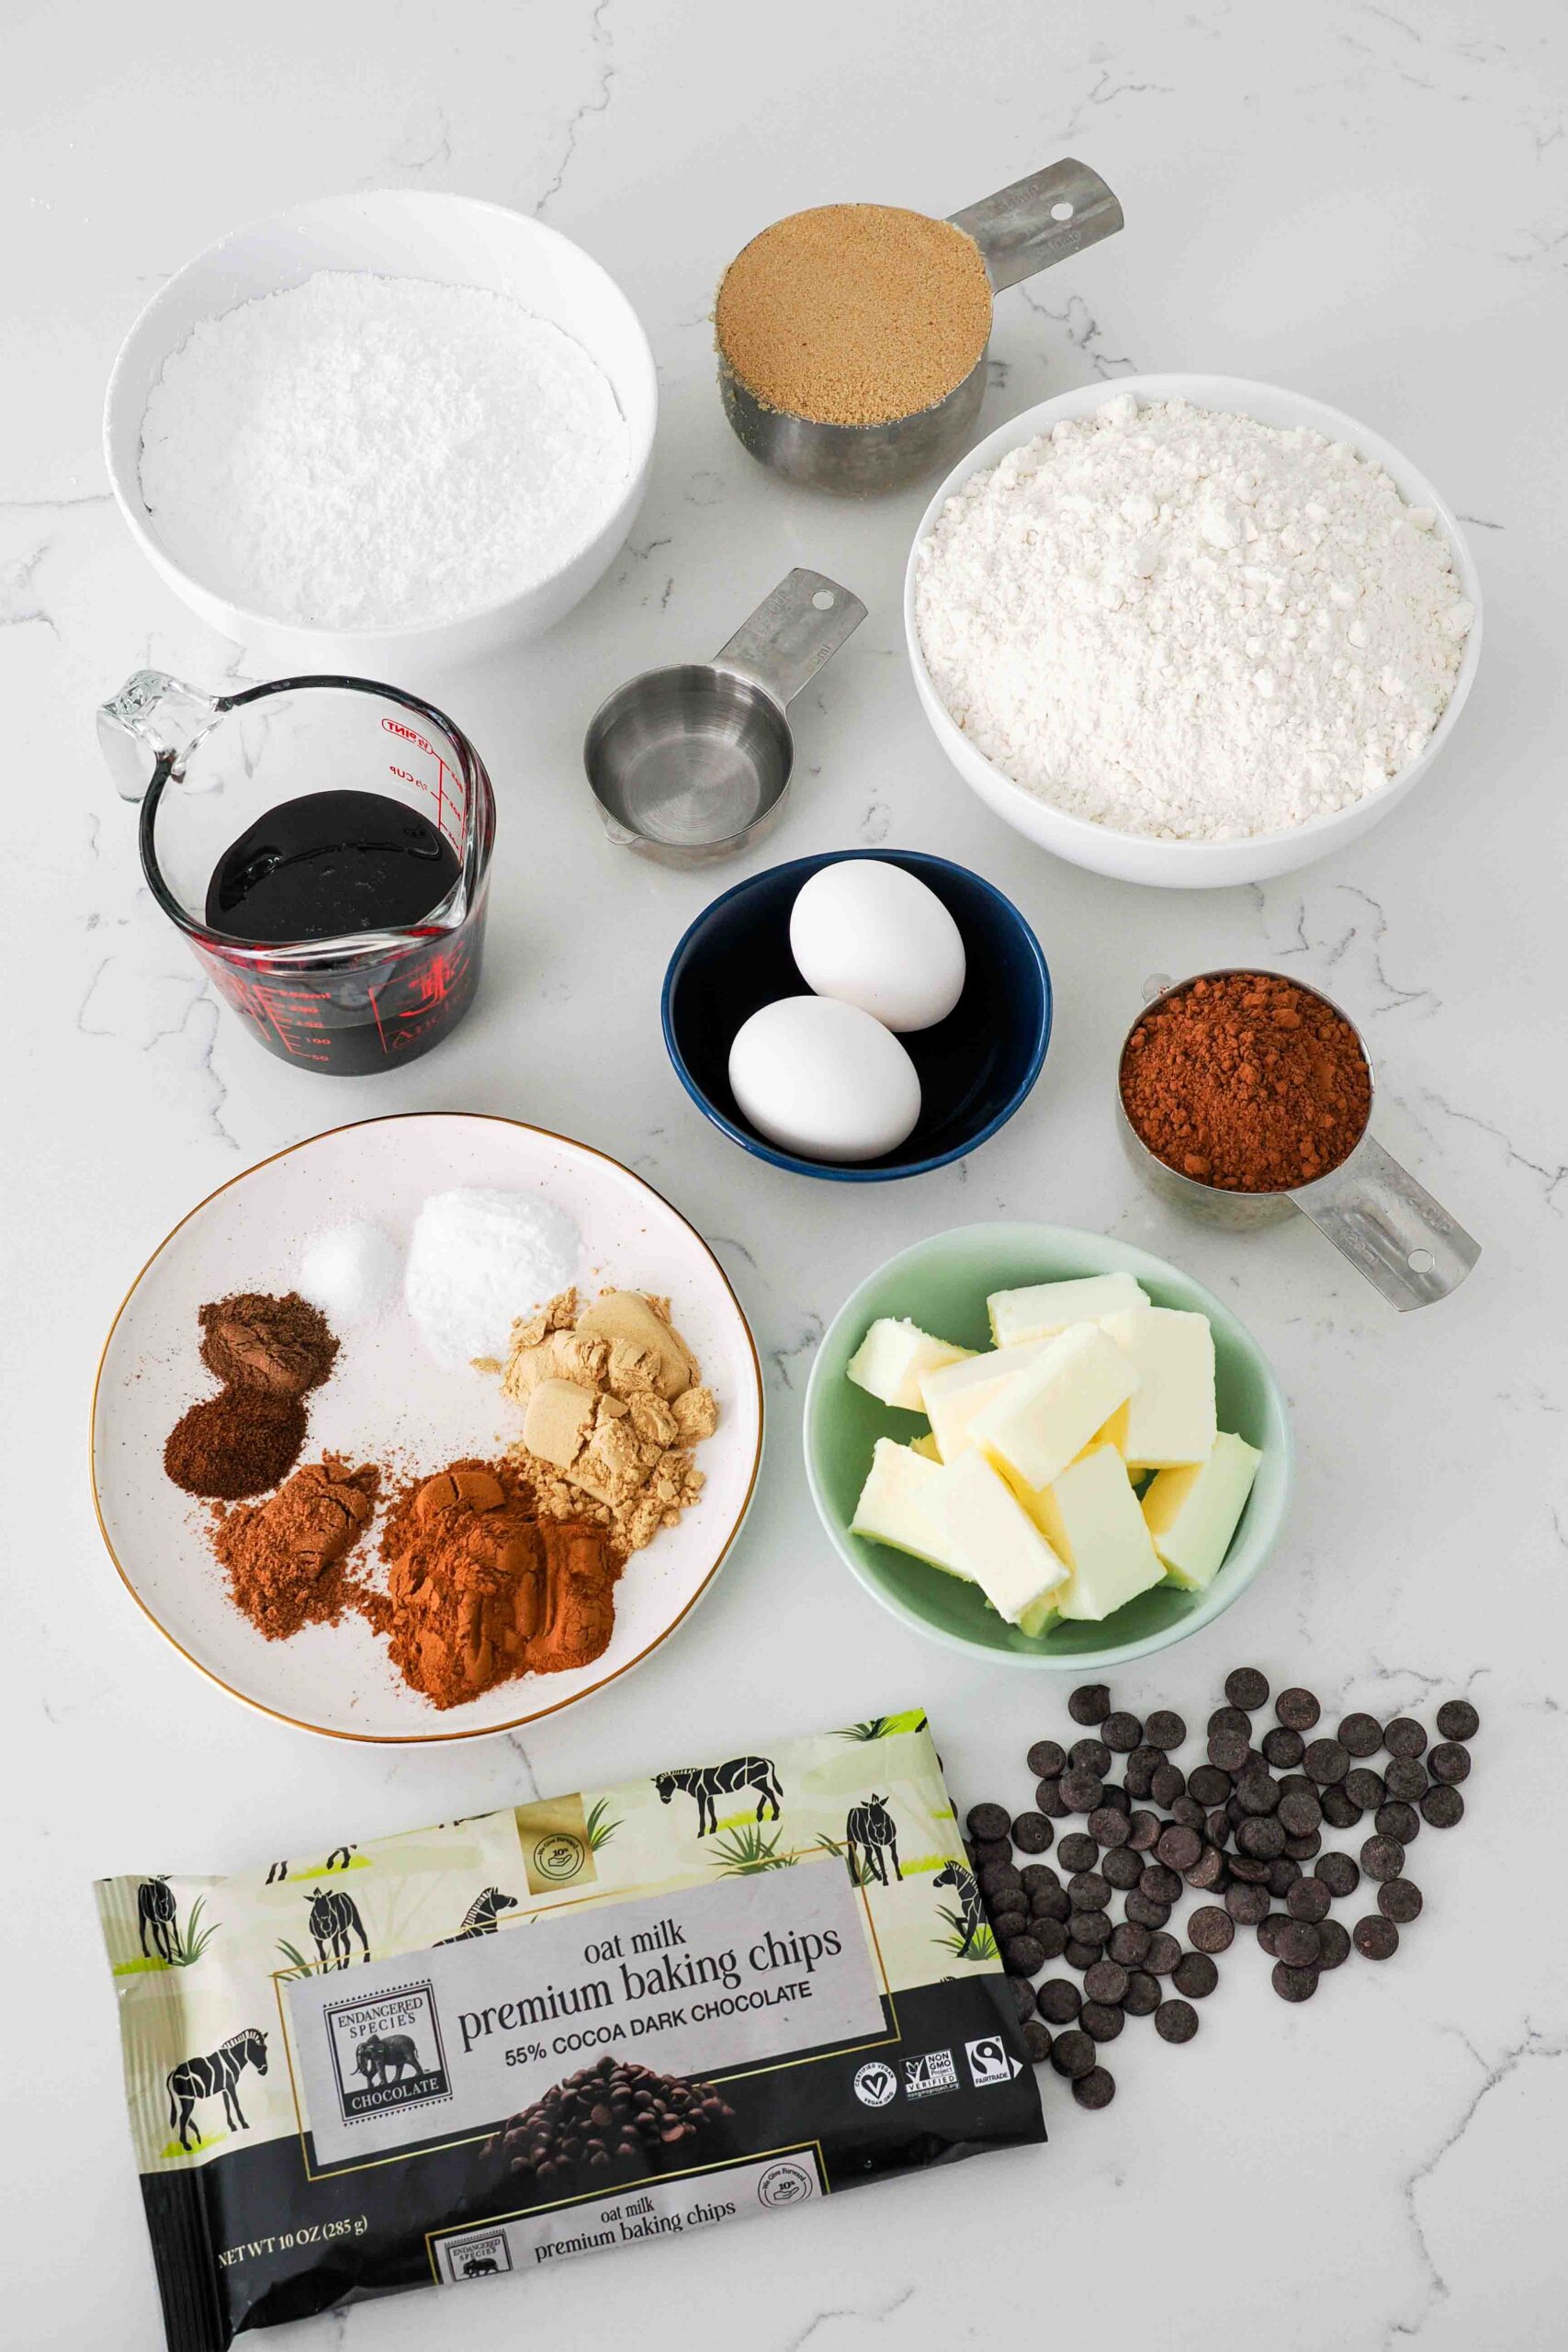 A collection of ingredients used to make chocolate gingerbread cookies.